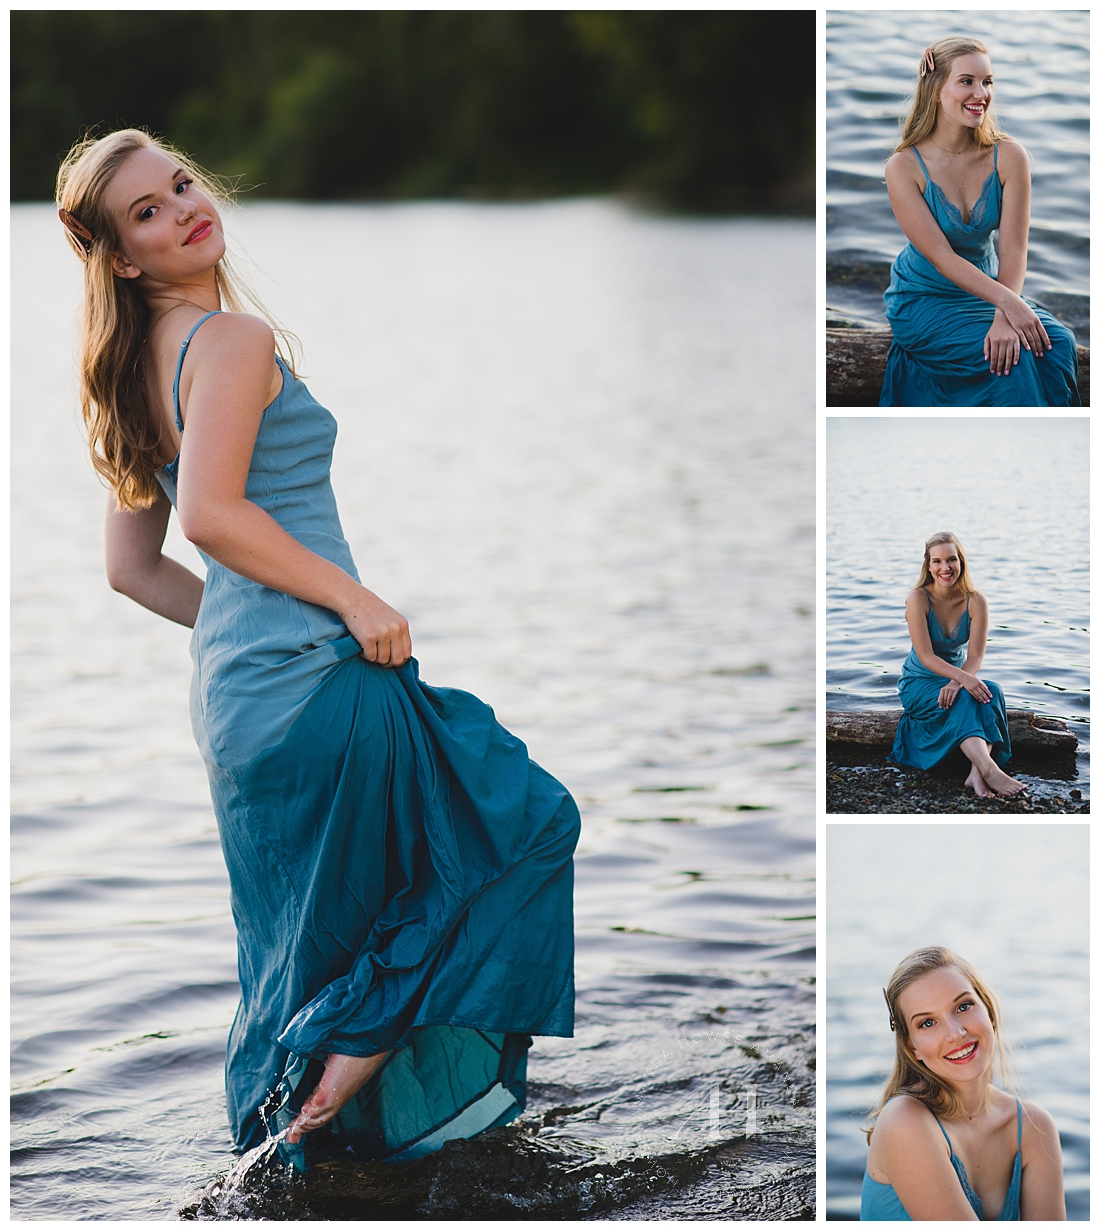 Senior Portraits in the Water | How to Pose in the Water, Beachy Senior Portraits in August at Fort Steilacoom, Dipping a Long Dress in Water for Portraits | Photographed by the Best Tacoma Senior Portrait Photographer Amanda Howse